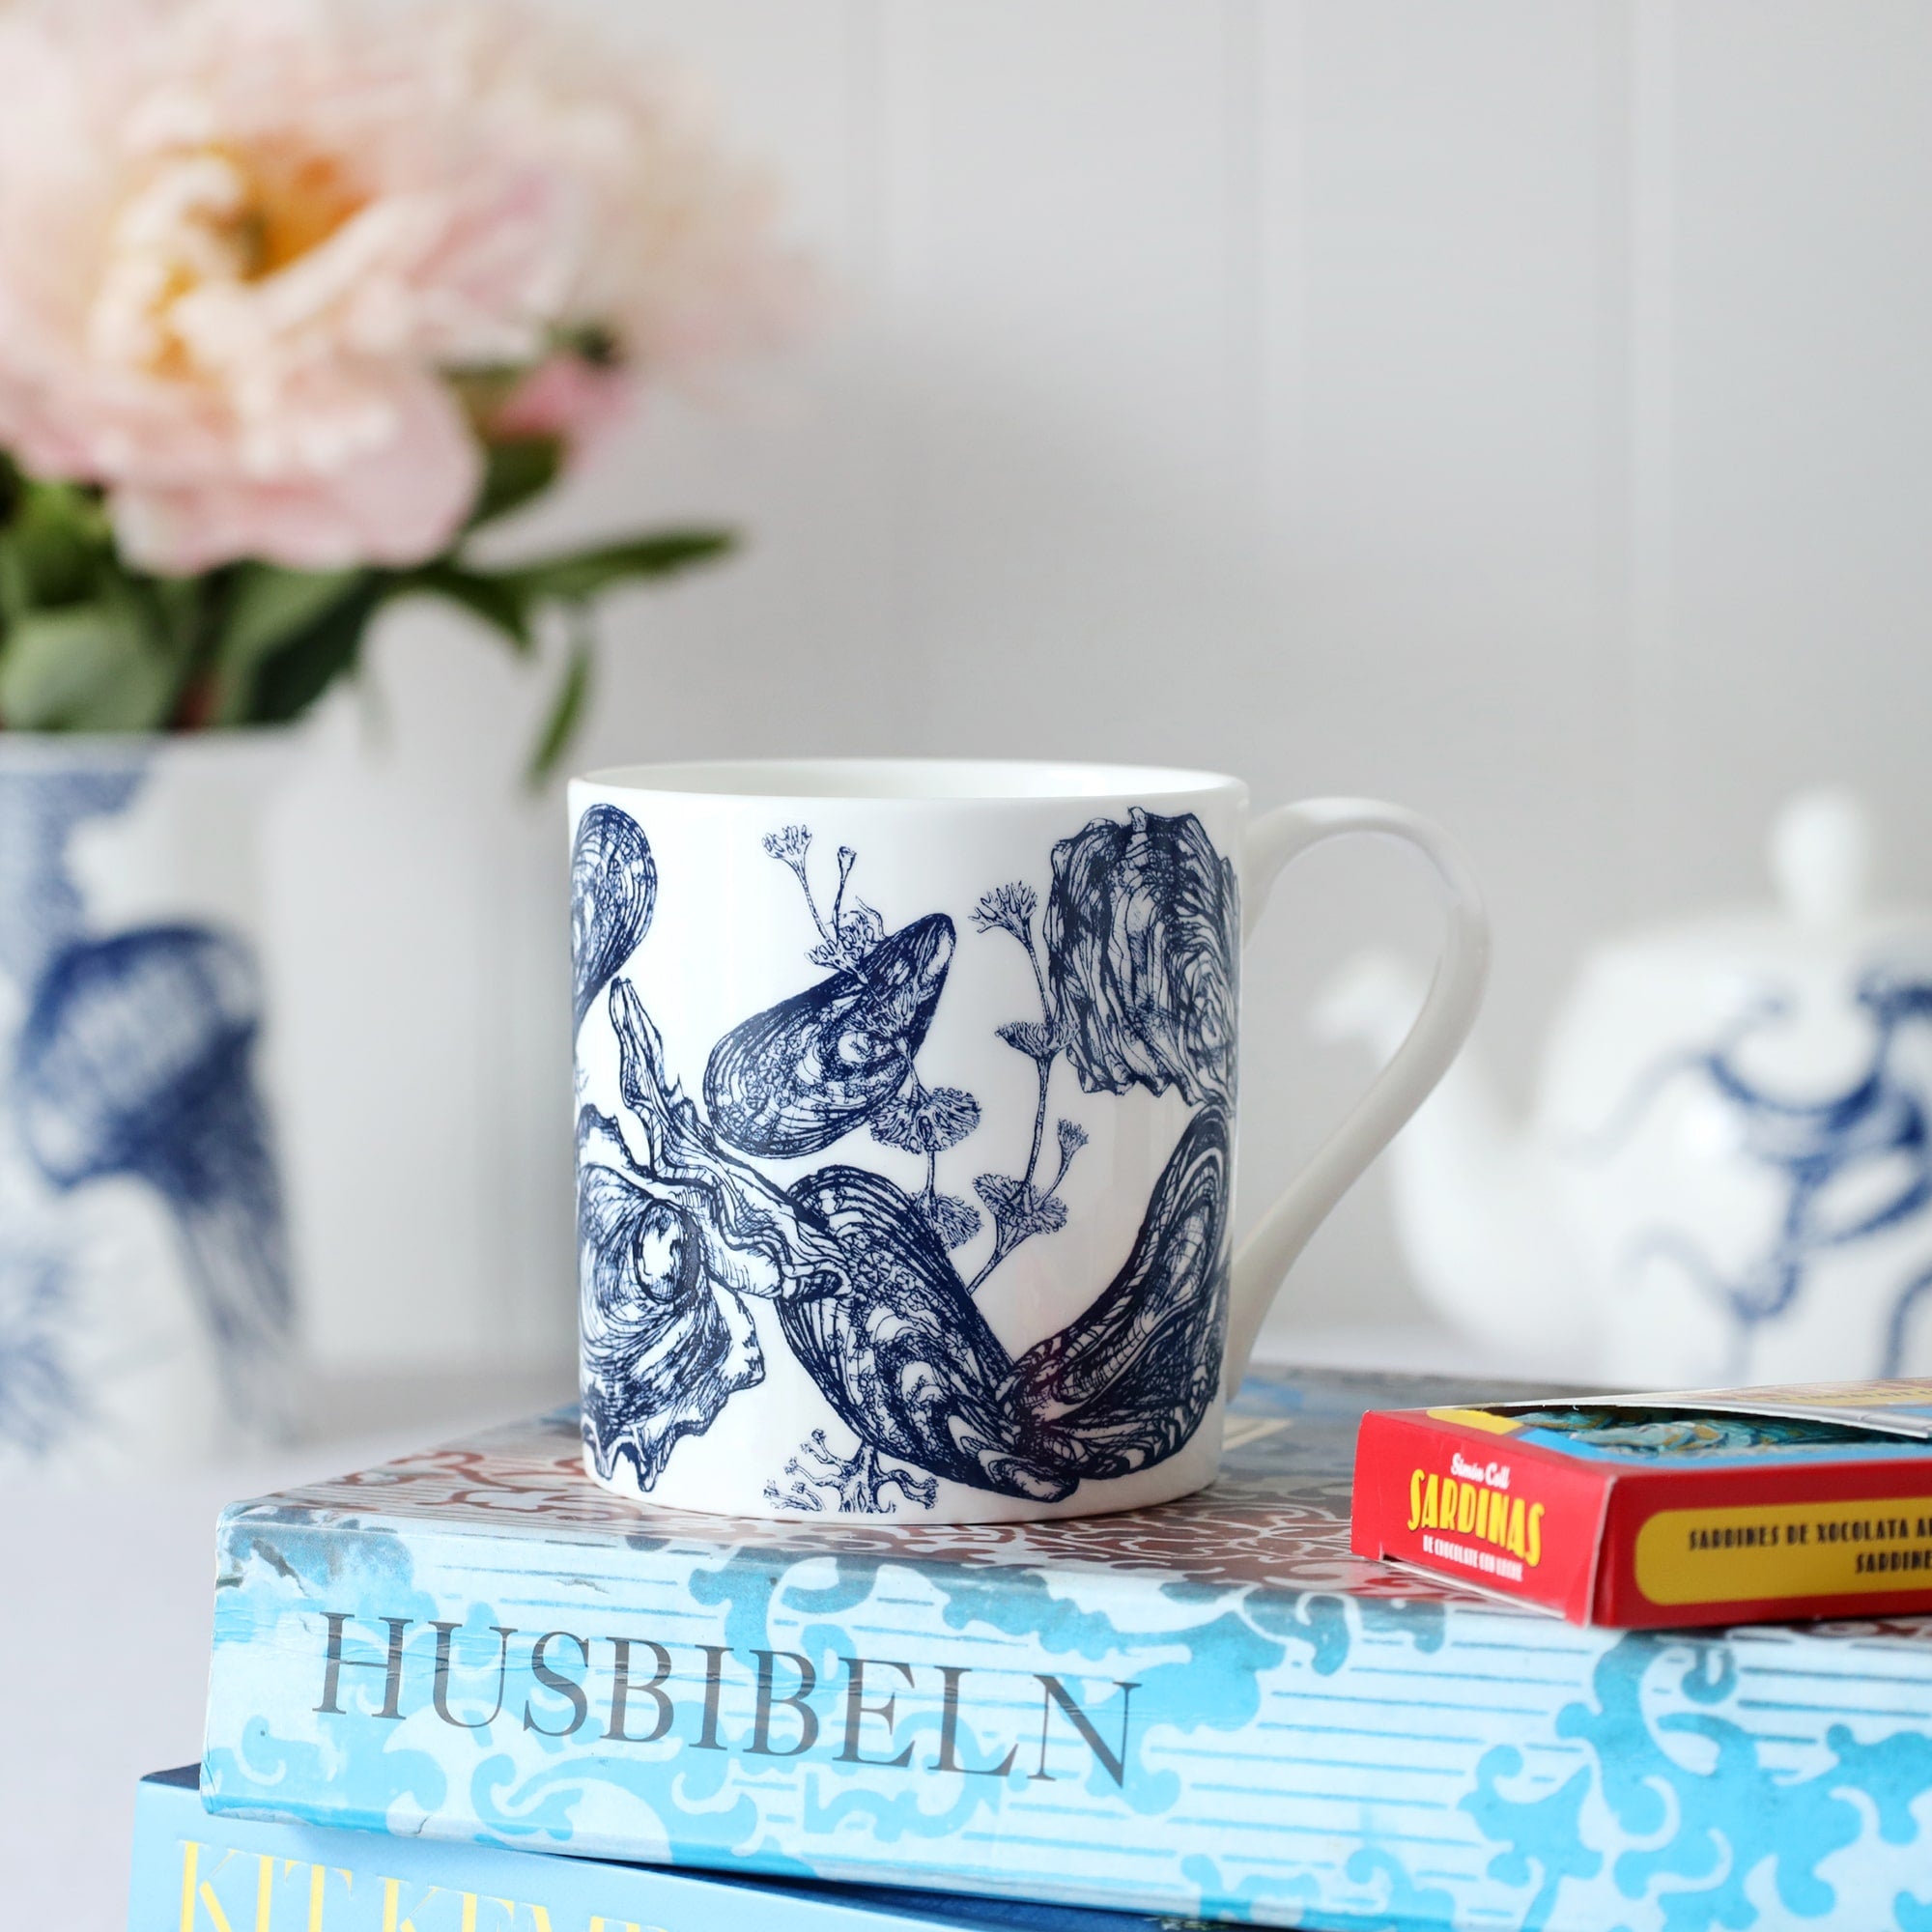 A close up of a white bone china mug with dark blue illustrated mussels & oyster design mug. This is sitting on a white table cloth with a plate and biscuits and some flowers in the background.